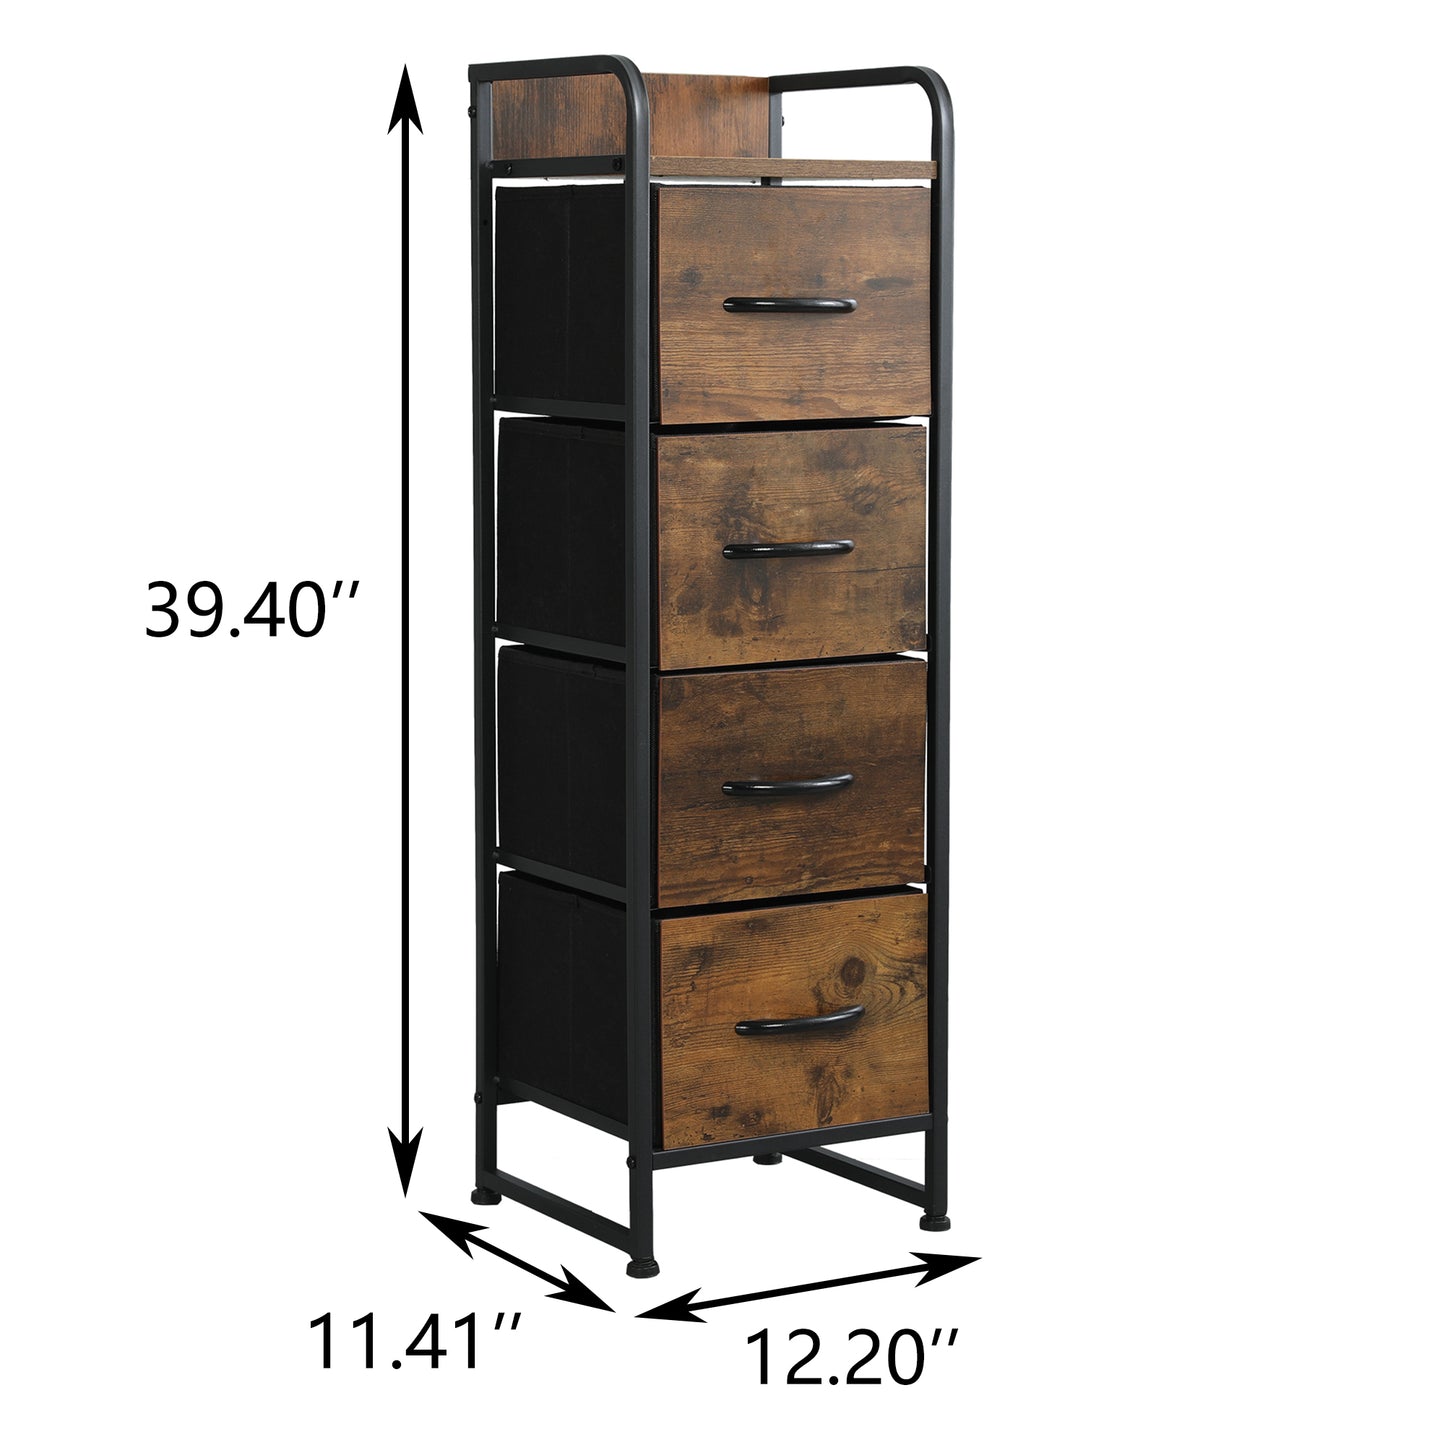 Rustic Brown 4 Drawer Dresser, Small Fabric Storage Tower with Wooden Tabletop, Dressers and Chests of Drawers, Organizer Unit for Bedroom, Living Room, Hallway, Closets and Nursery